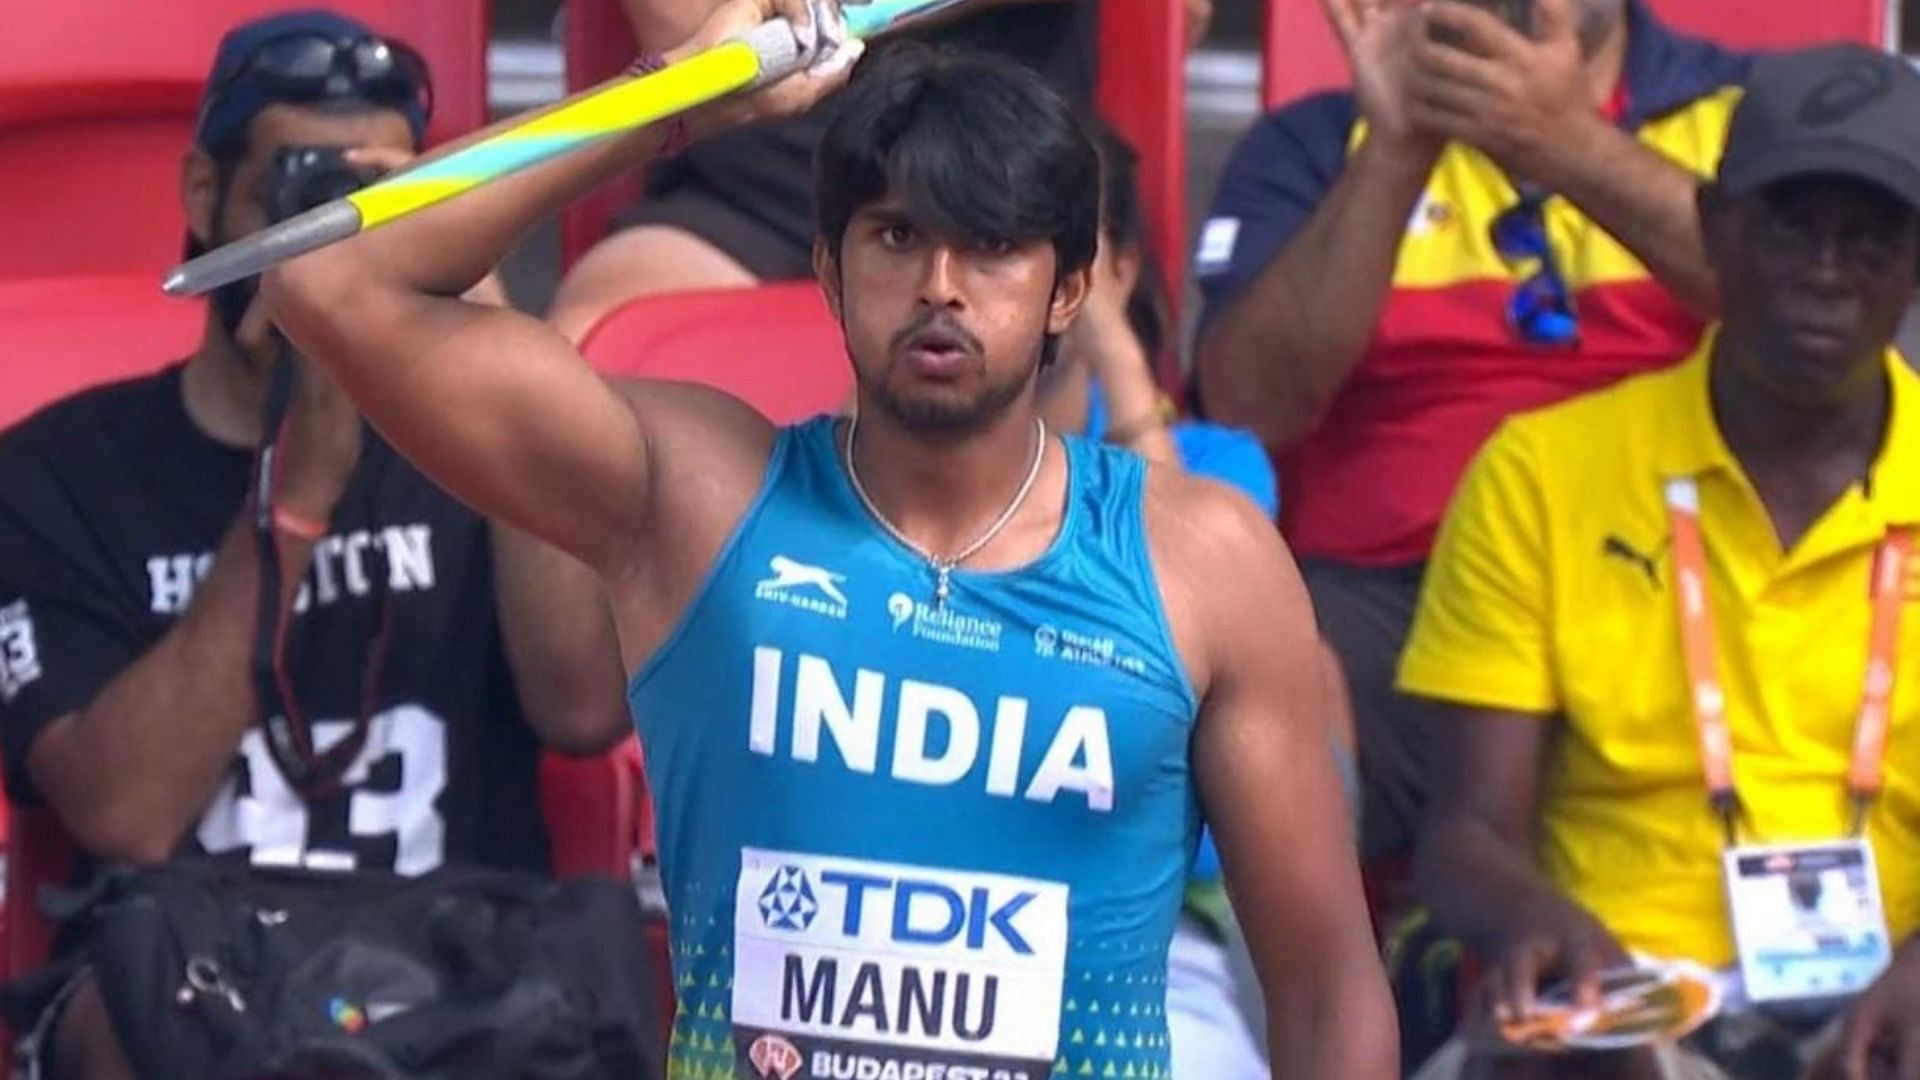 DP Manu has been fighting an uphill battle in his quest to qualify for the Paris Olympics